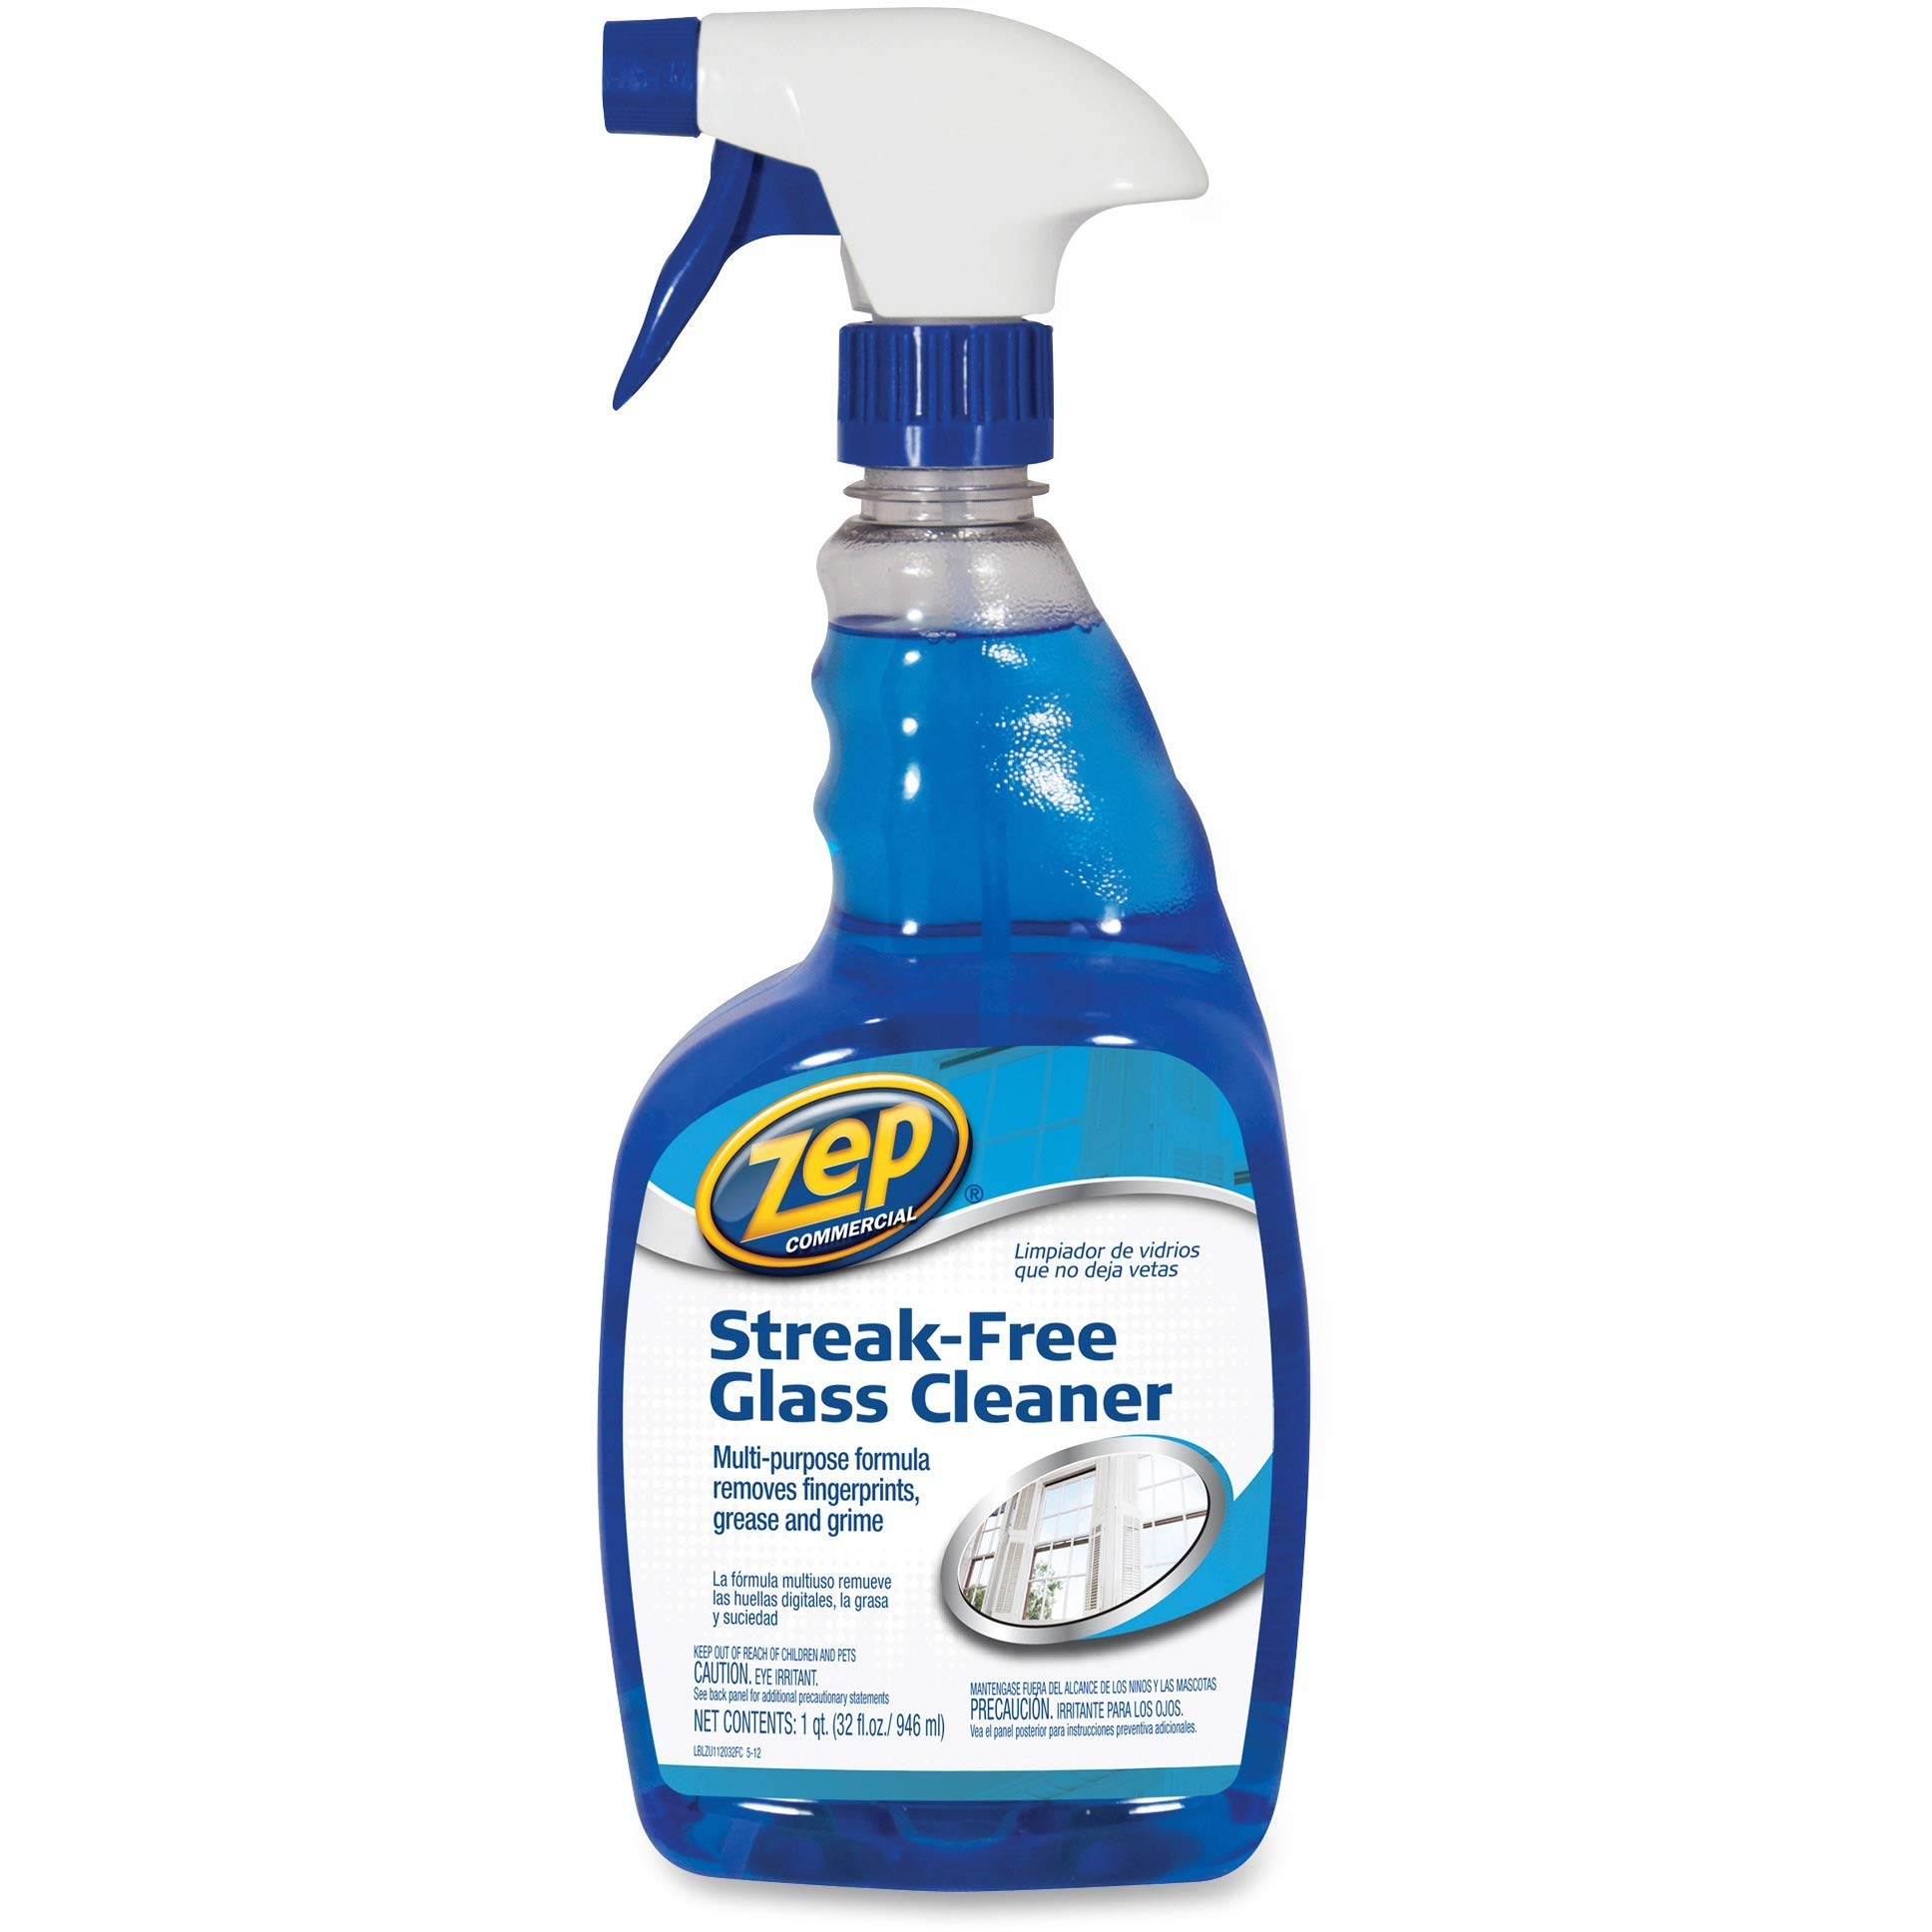 32-Oz Zep Streak-Free Glass Cleaner $1.66 + Free Shipping w/ Prime or on orders over $35